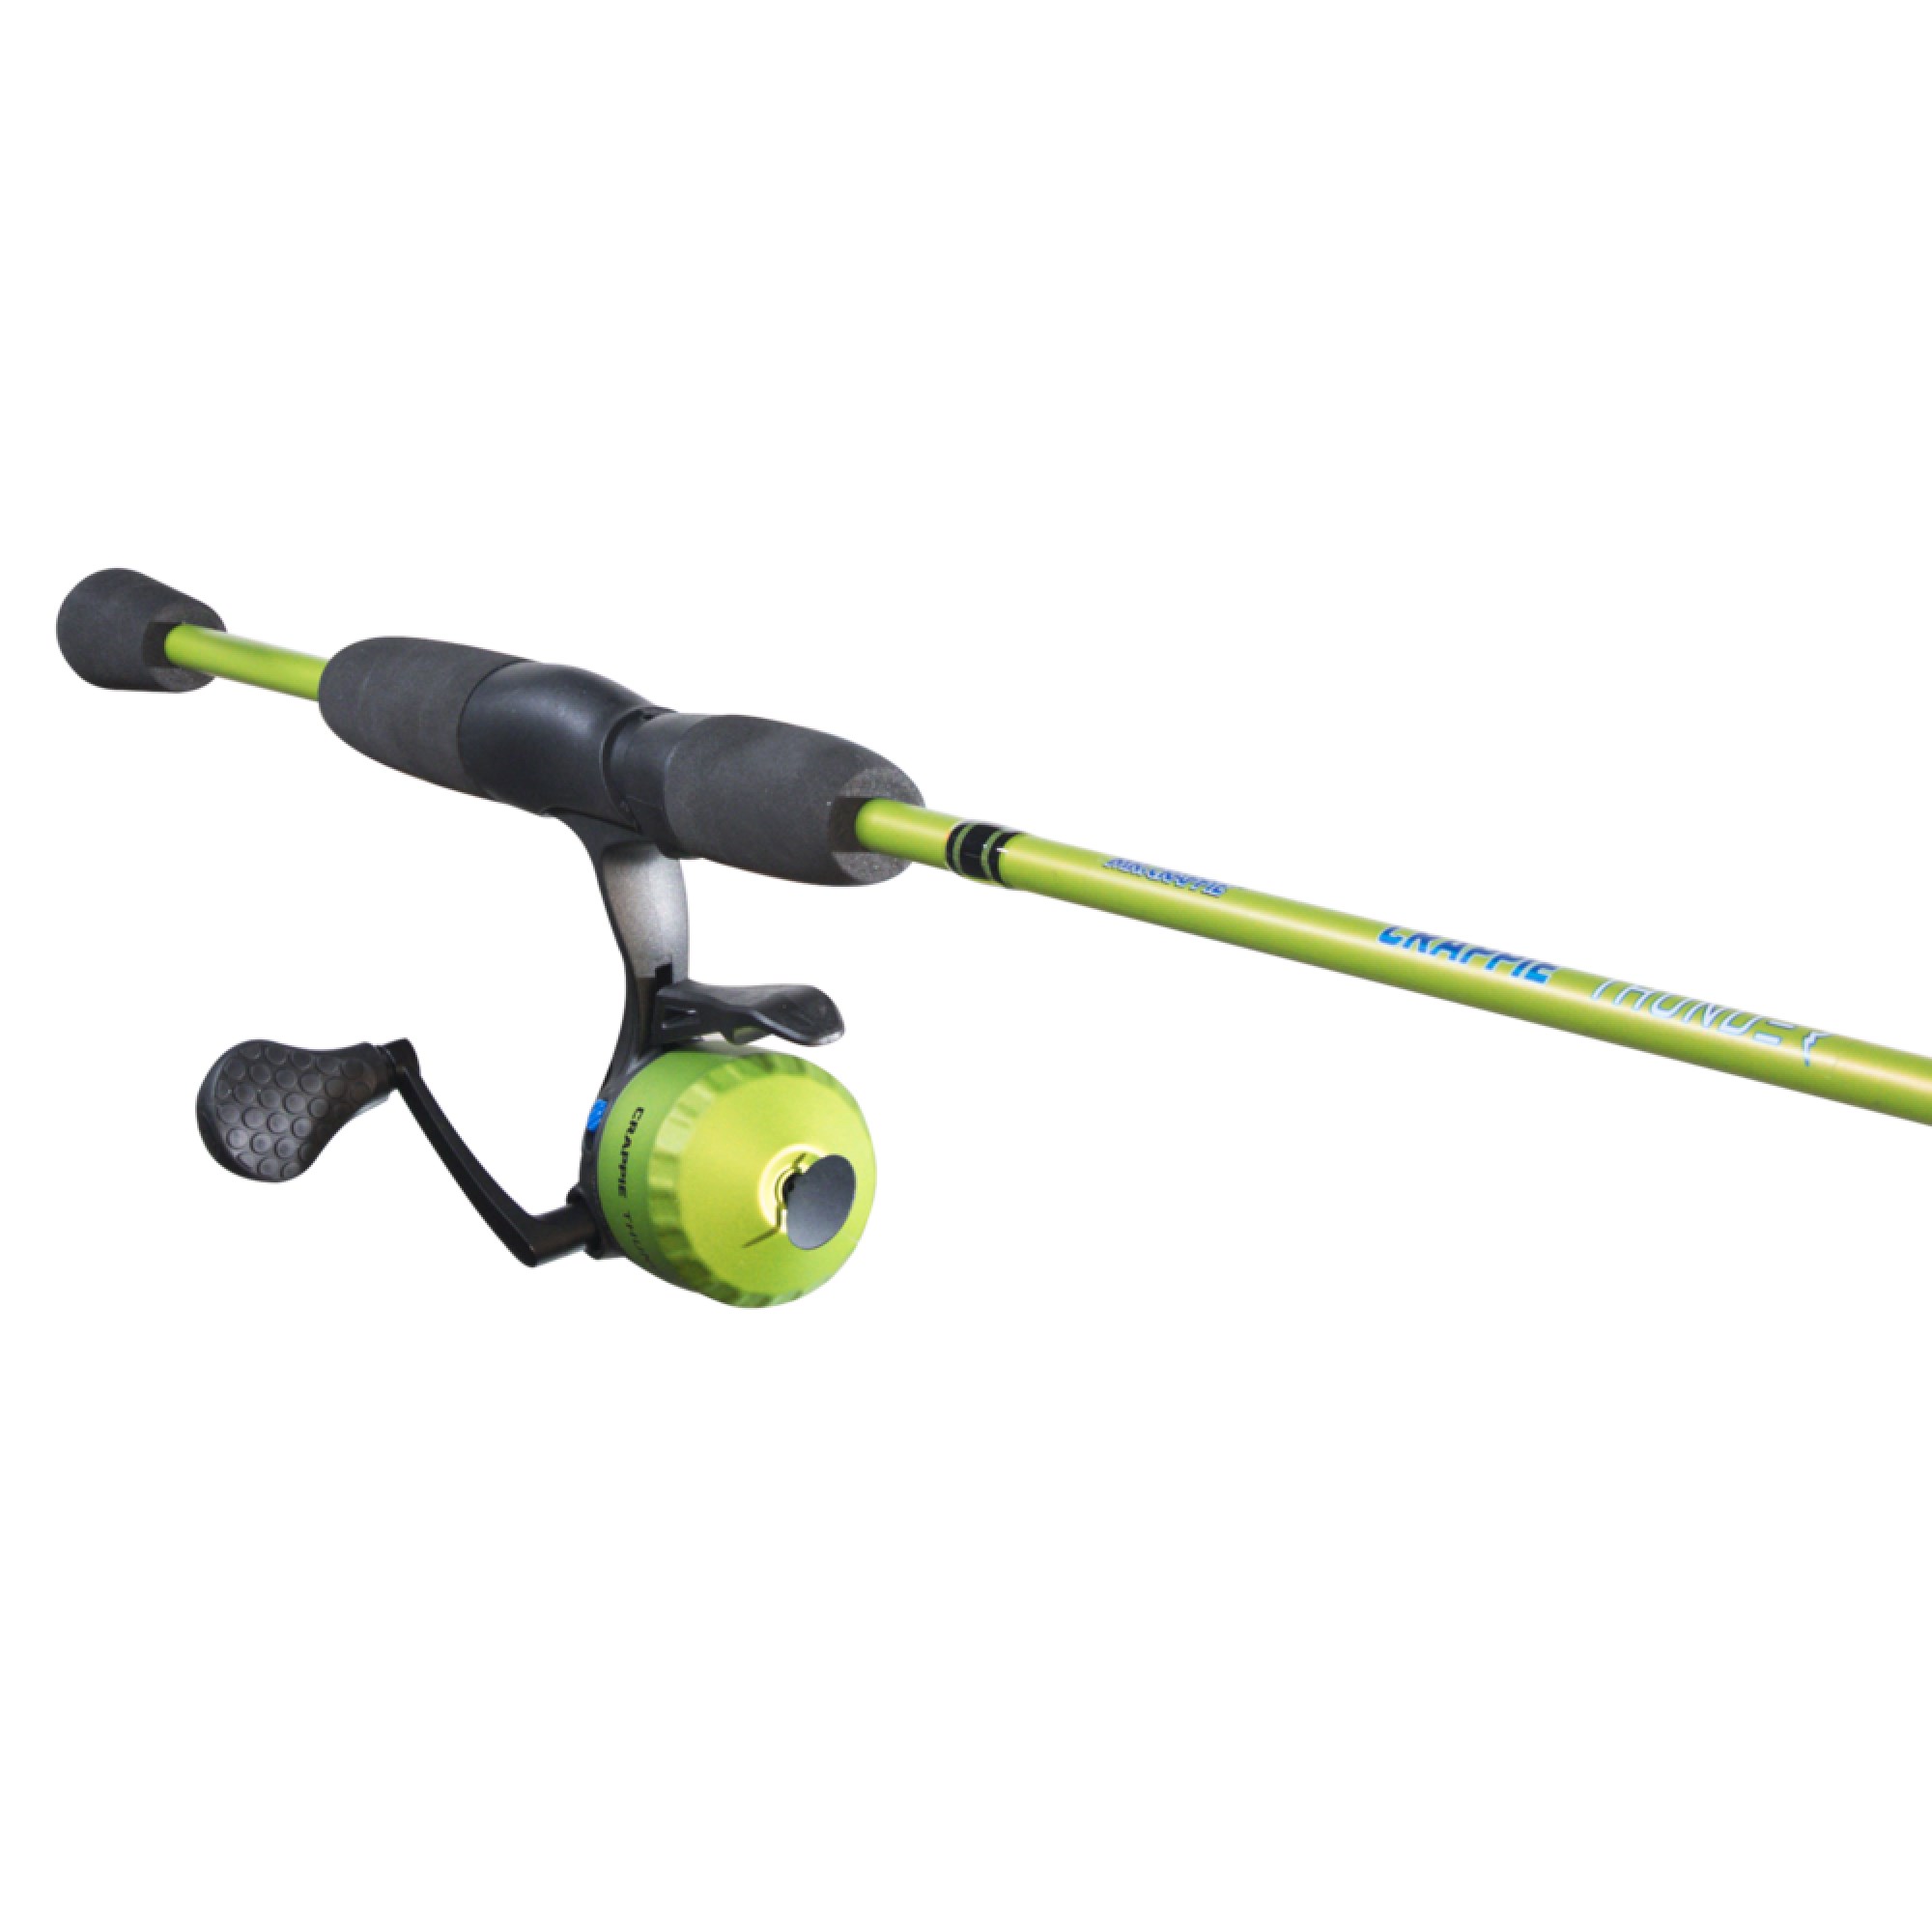 Crappie Thunder Underspin Reel